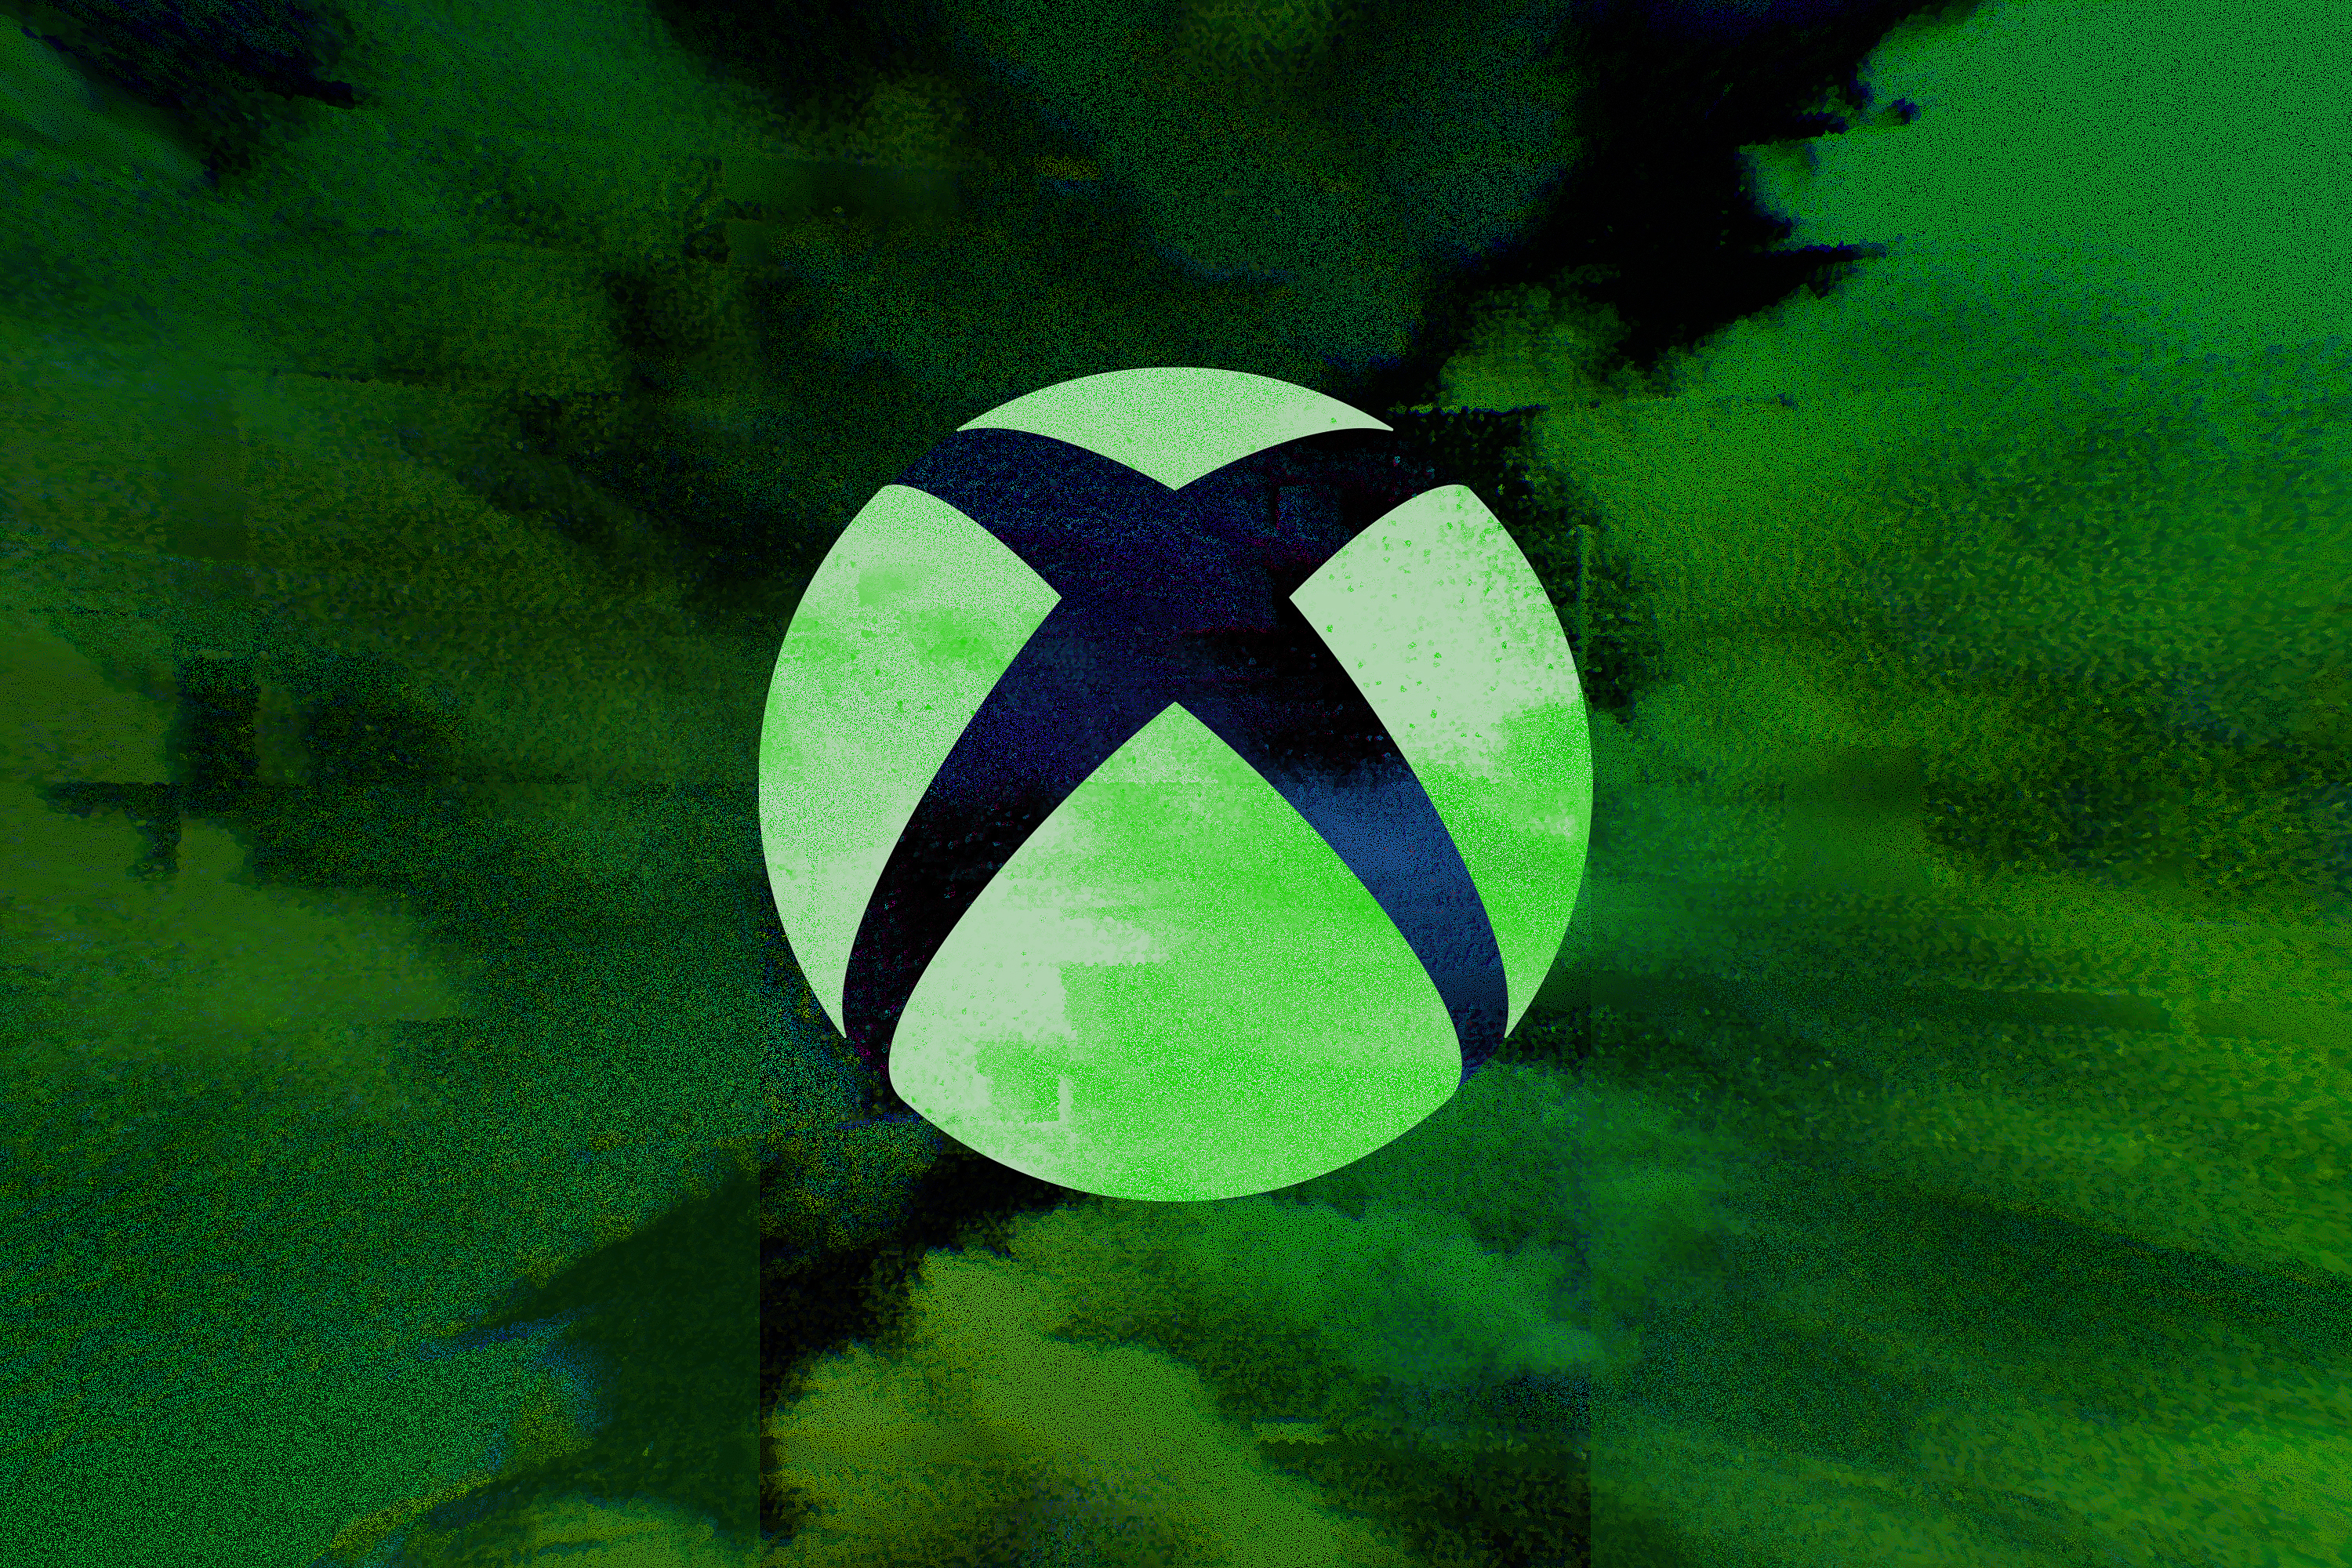 Xbox heading to Gamescom with a new livestream on Aug. 24